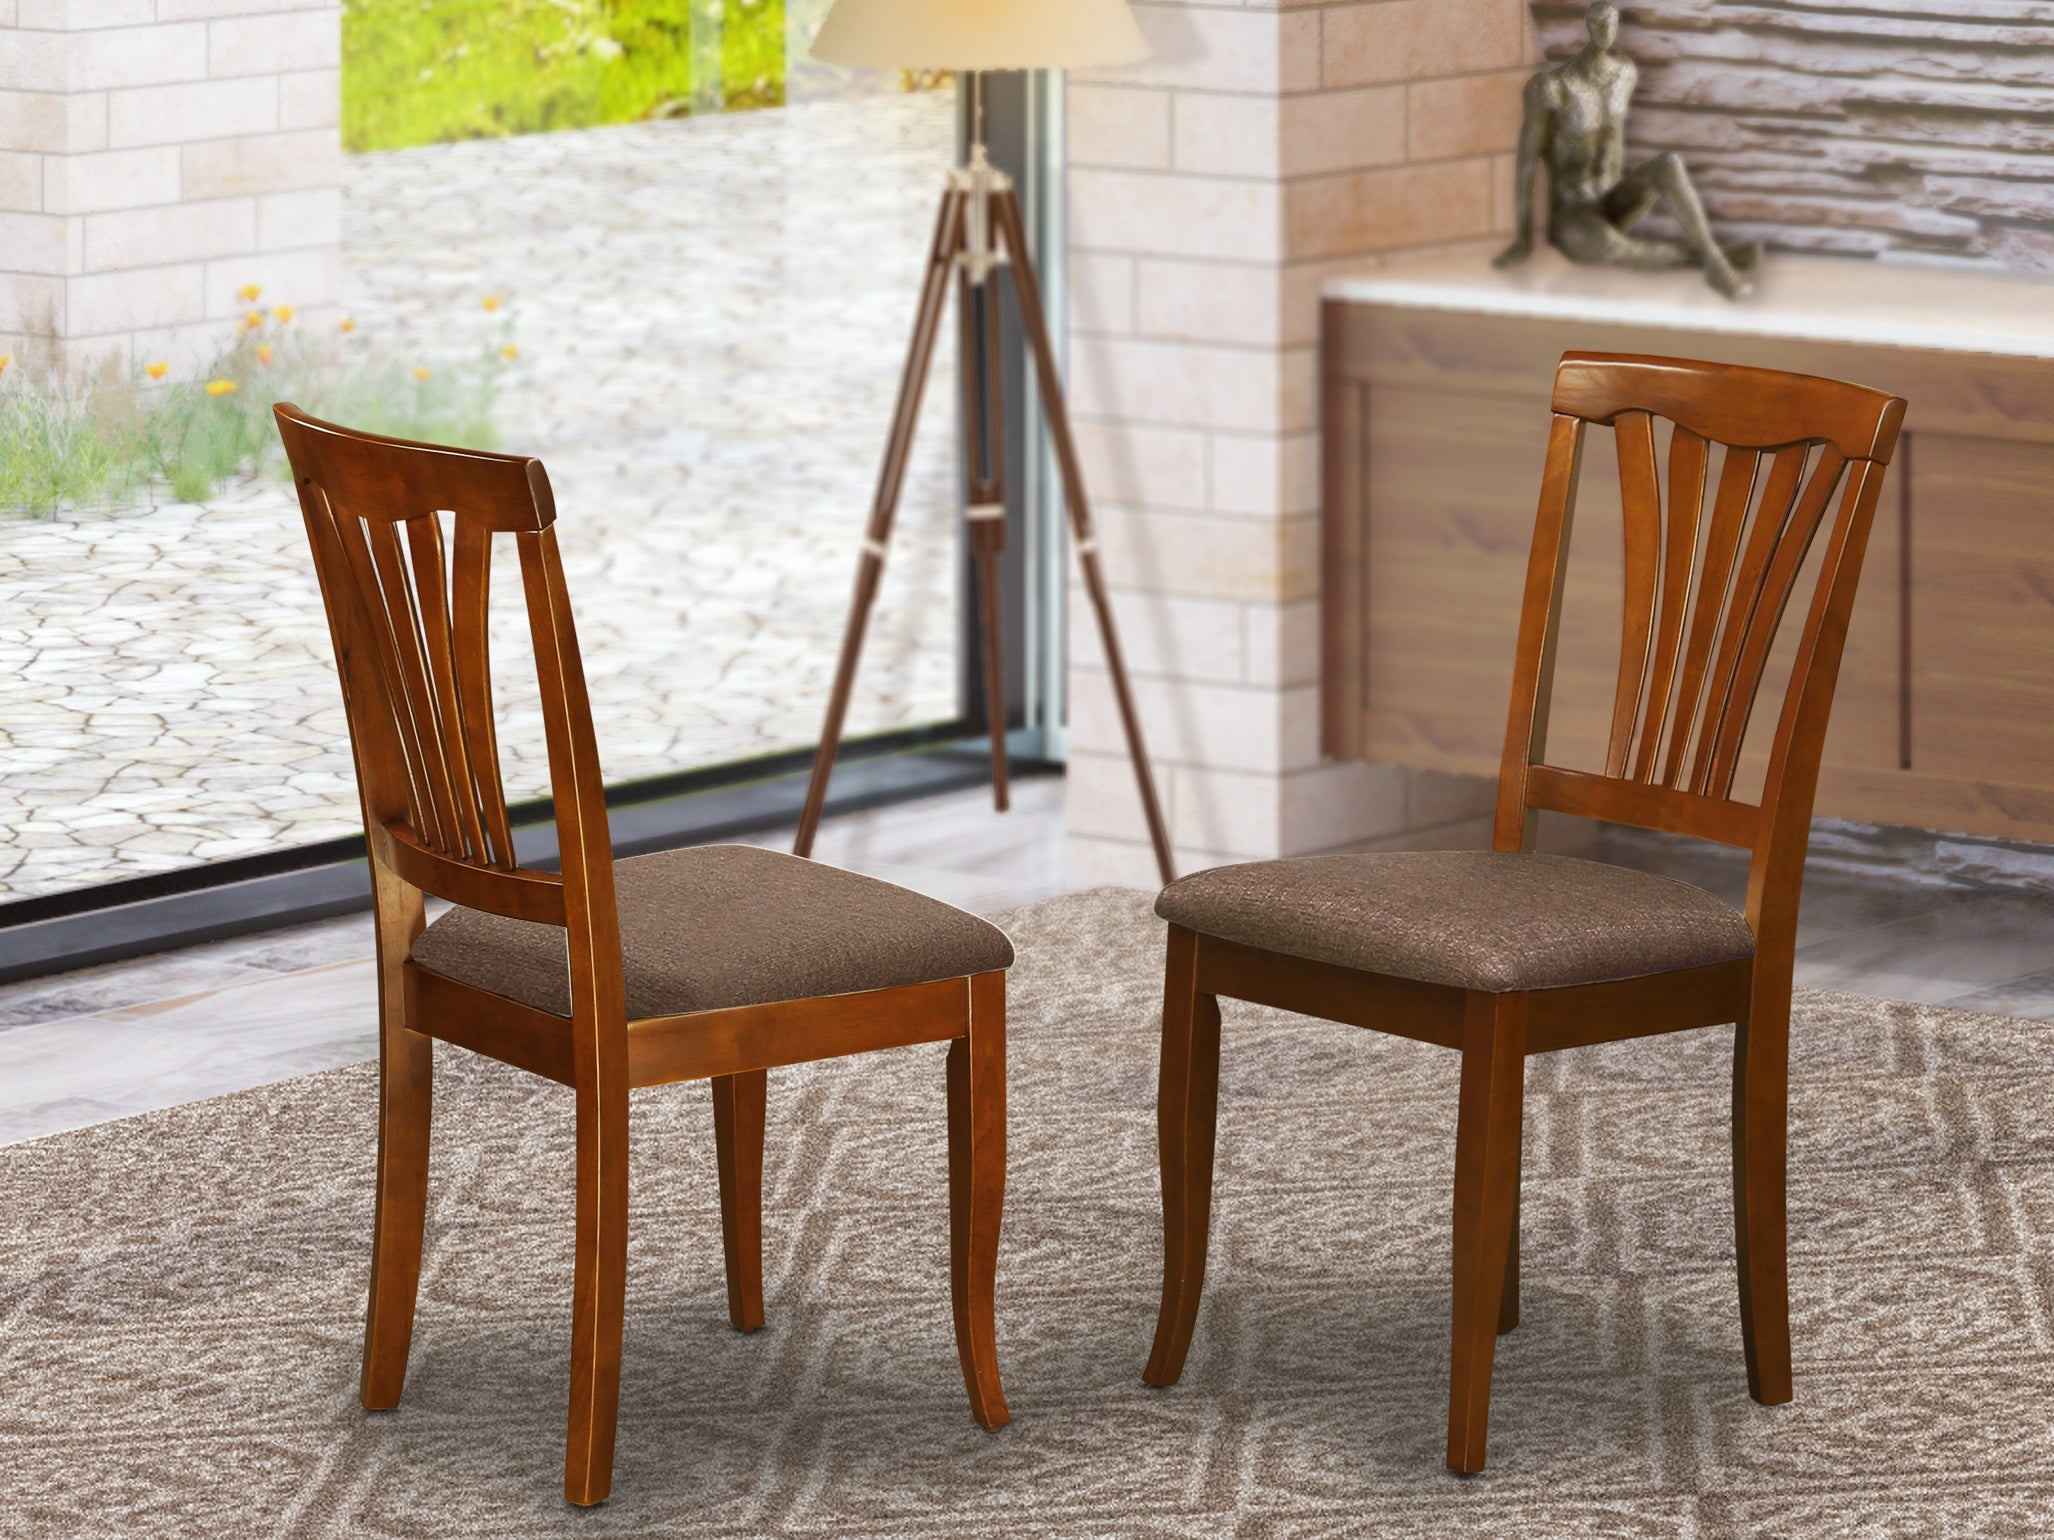 AVC-SBR-C Avon Chair for dining room with Microfiber Upholstered Seat - Saddle Brow Finish